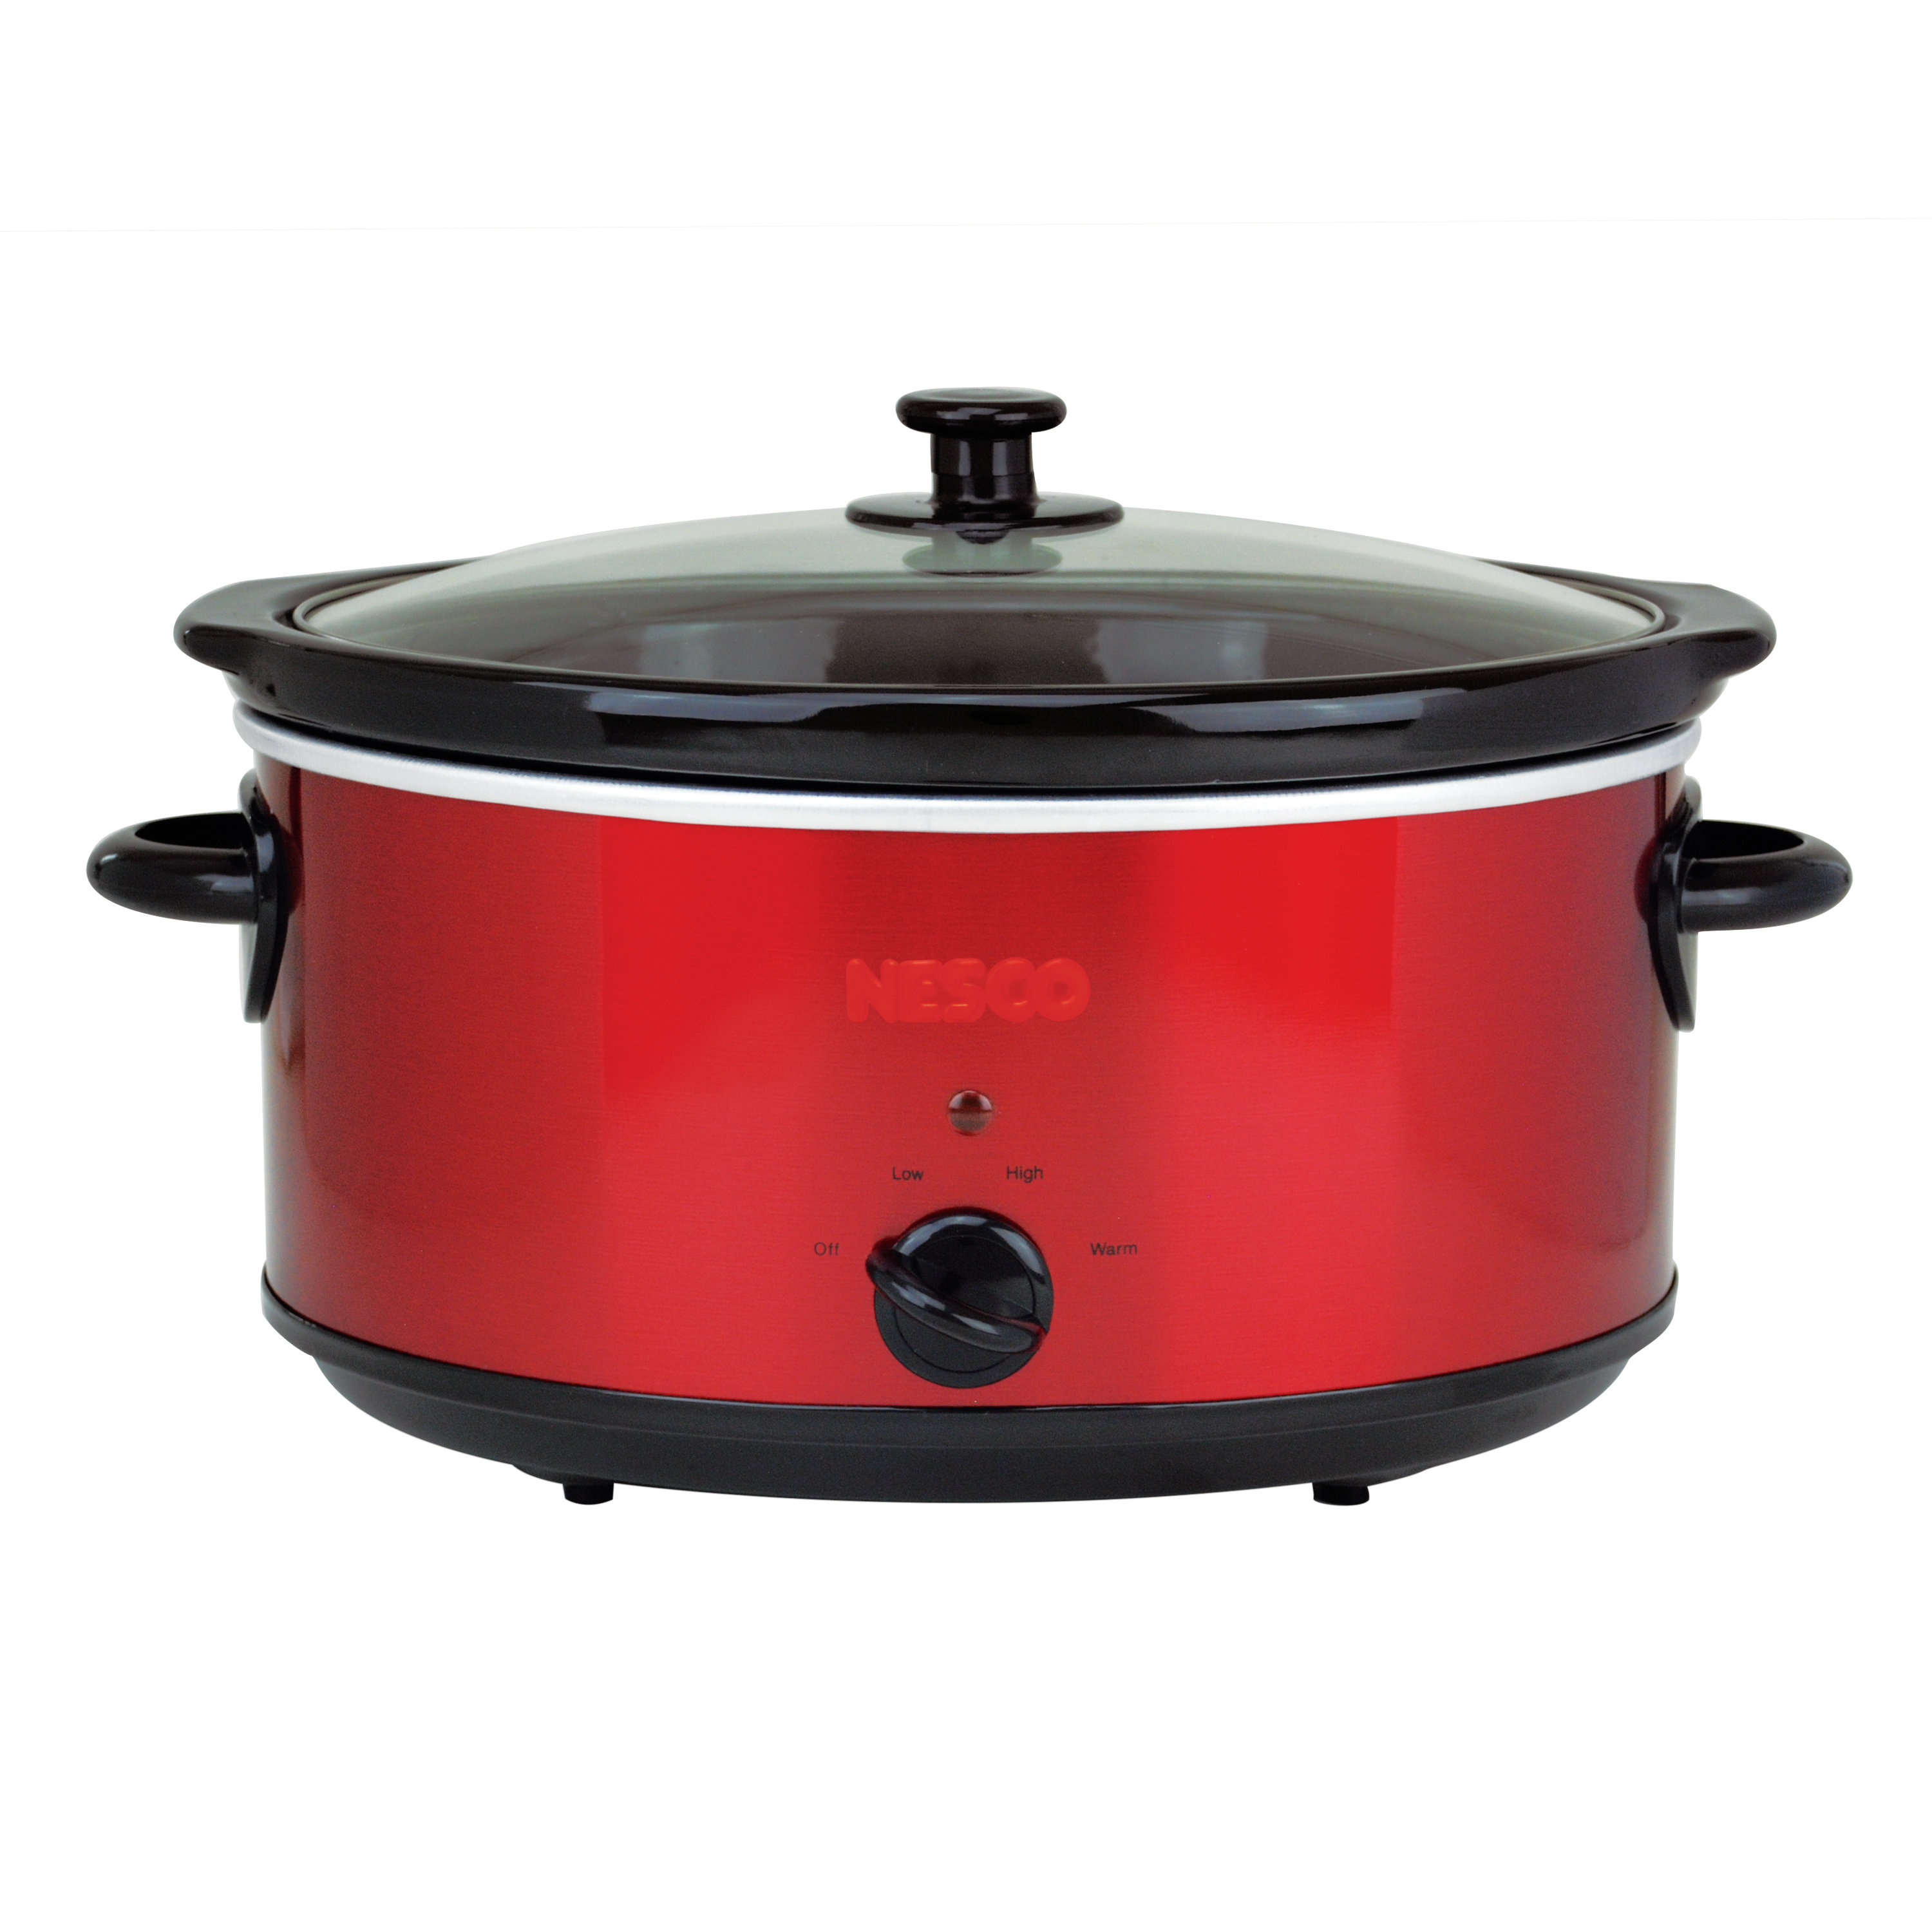 Reviews for West Bend 5 qt. Red Non-Stick Versatility Slow Cooker